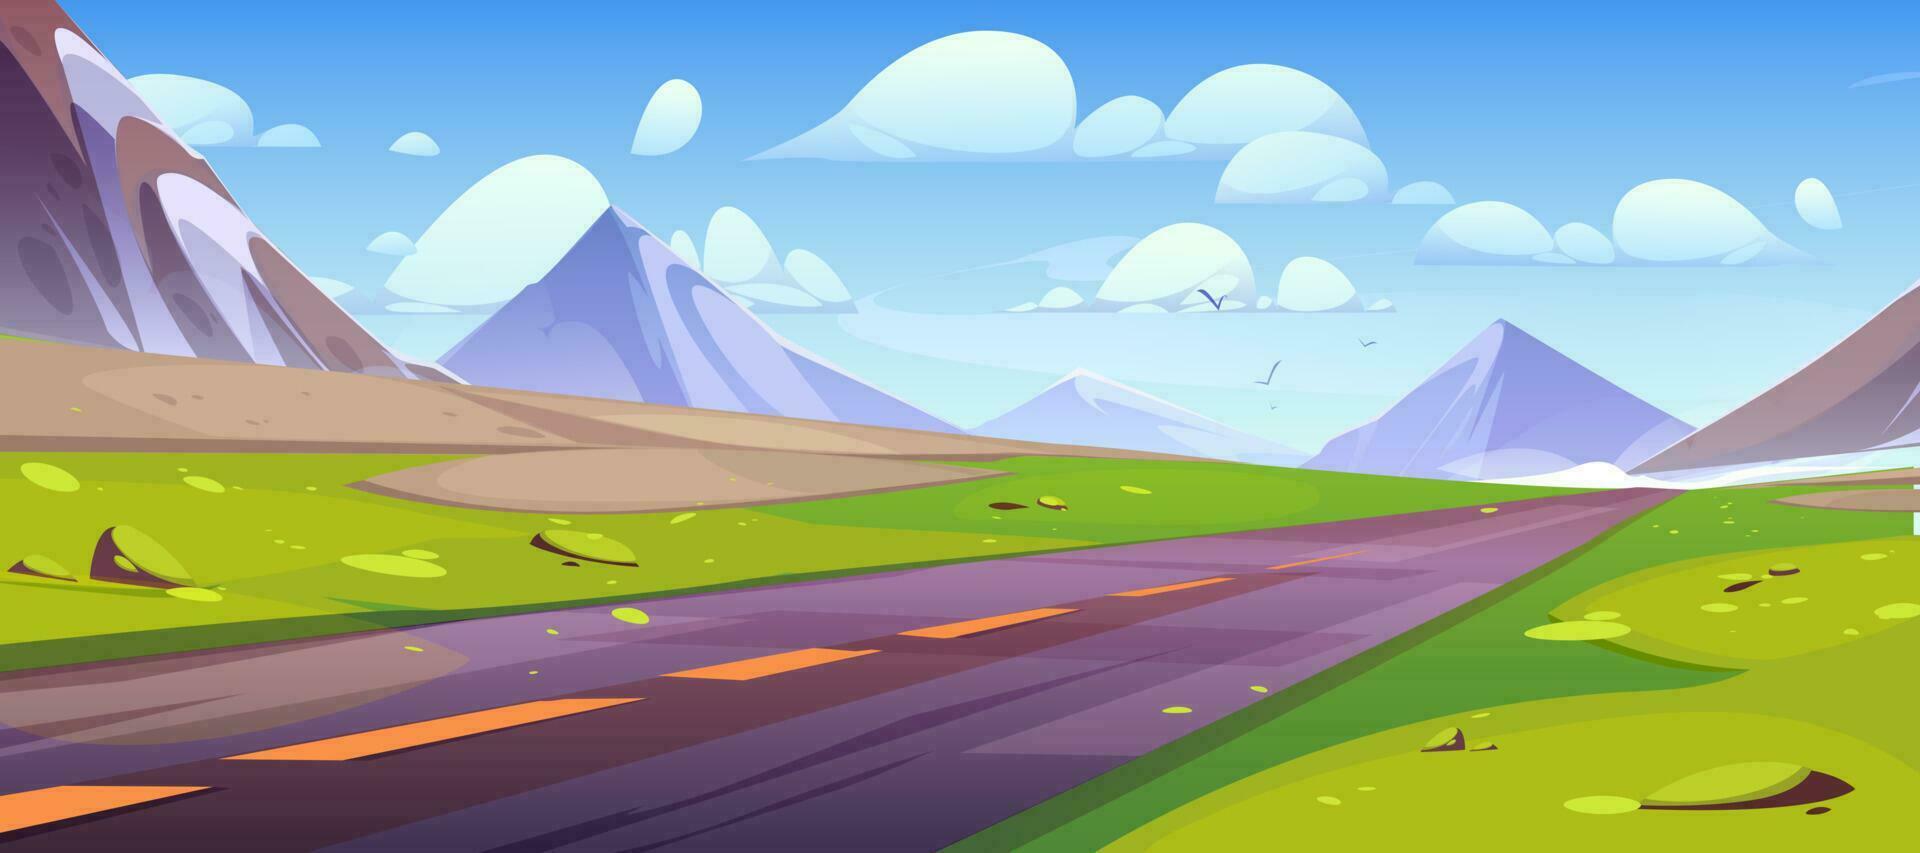 Road and mountain view landscape cartoon vector